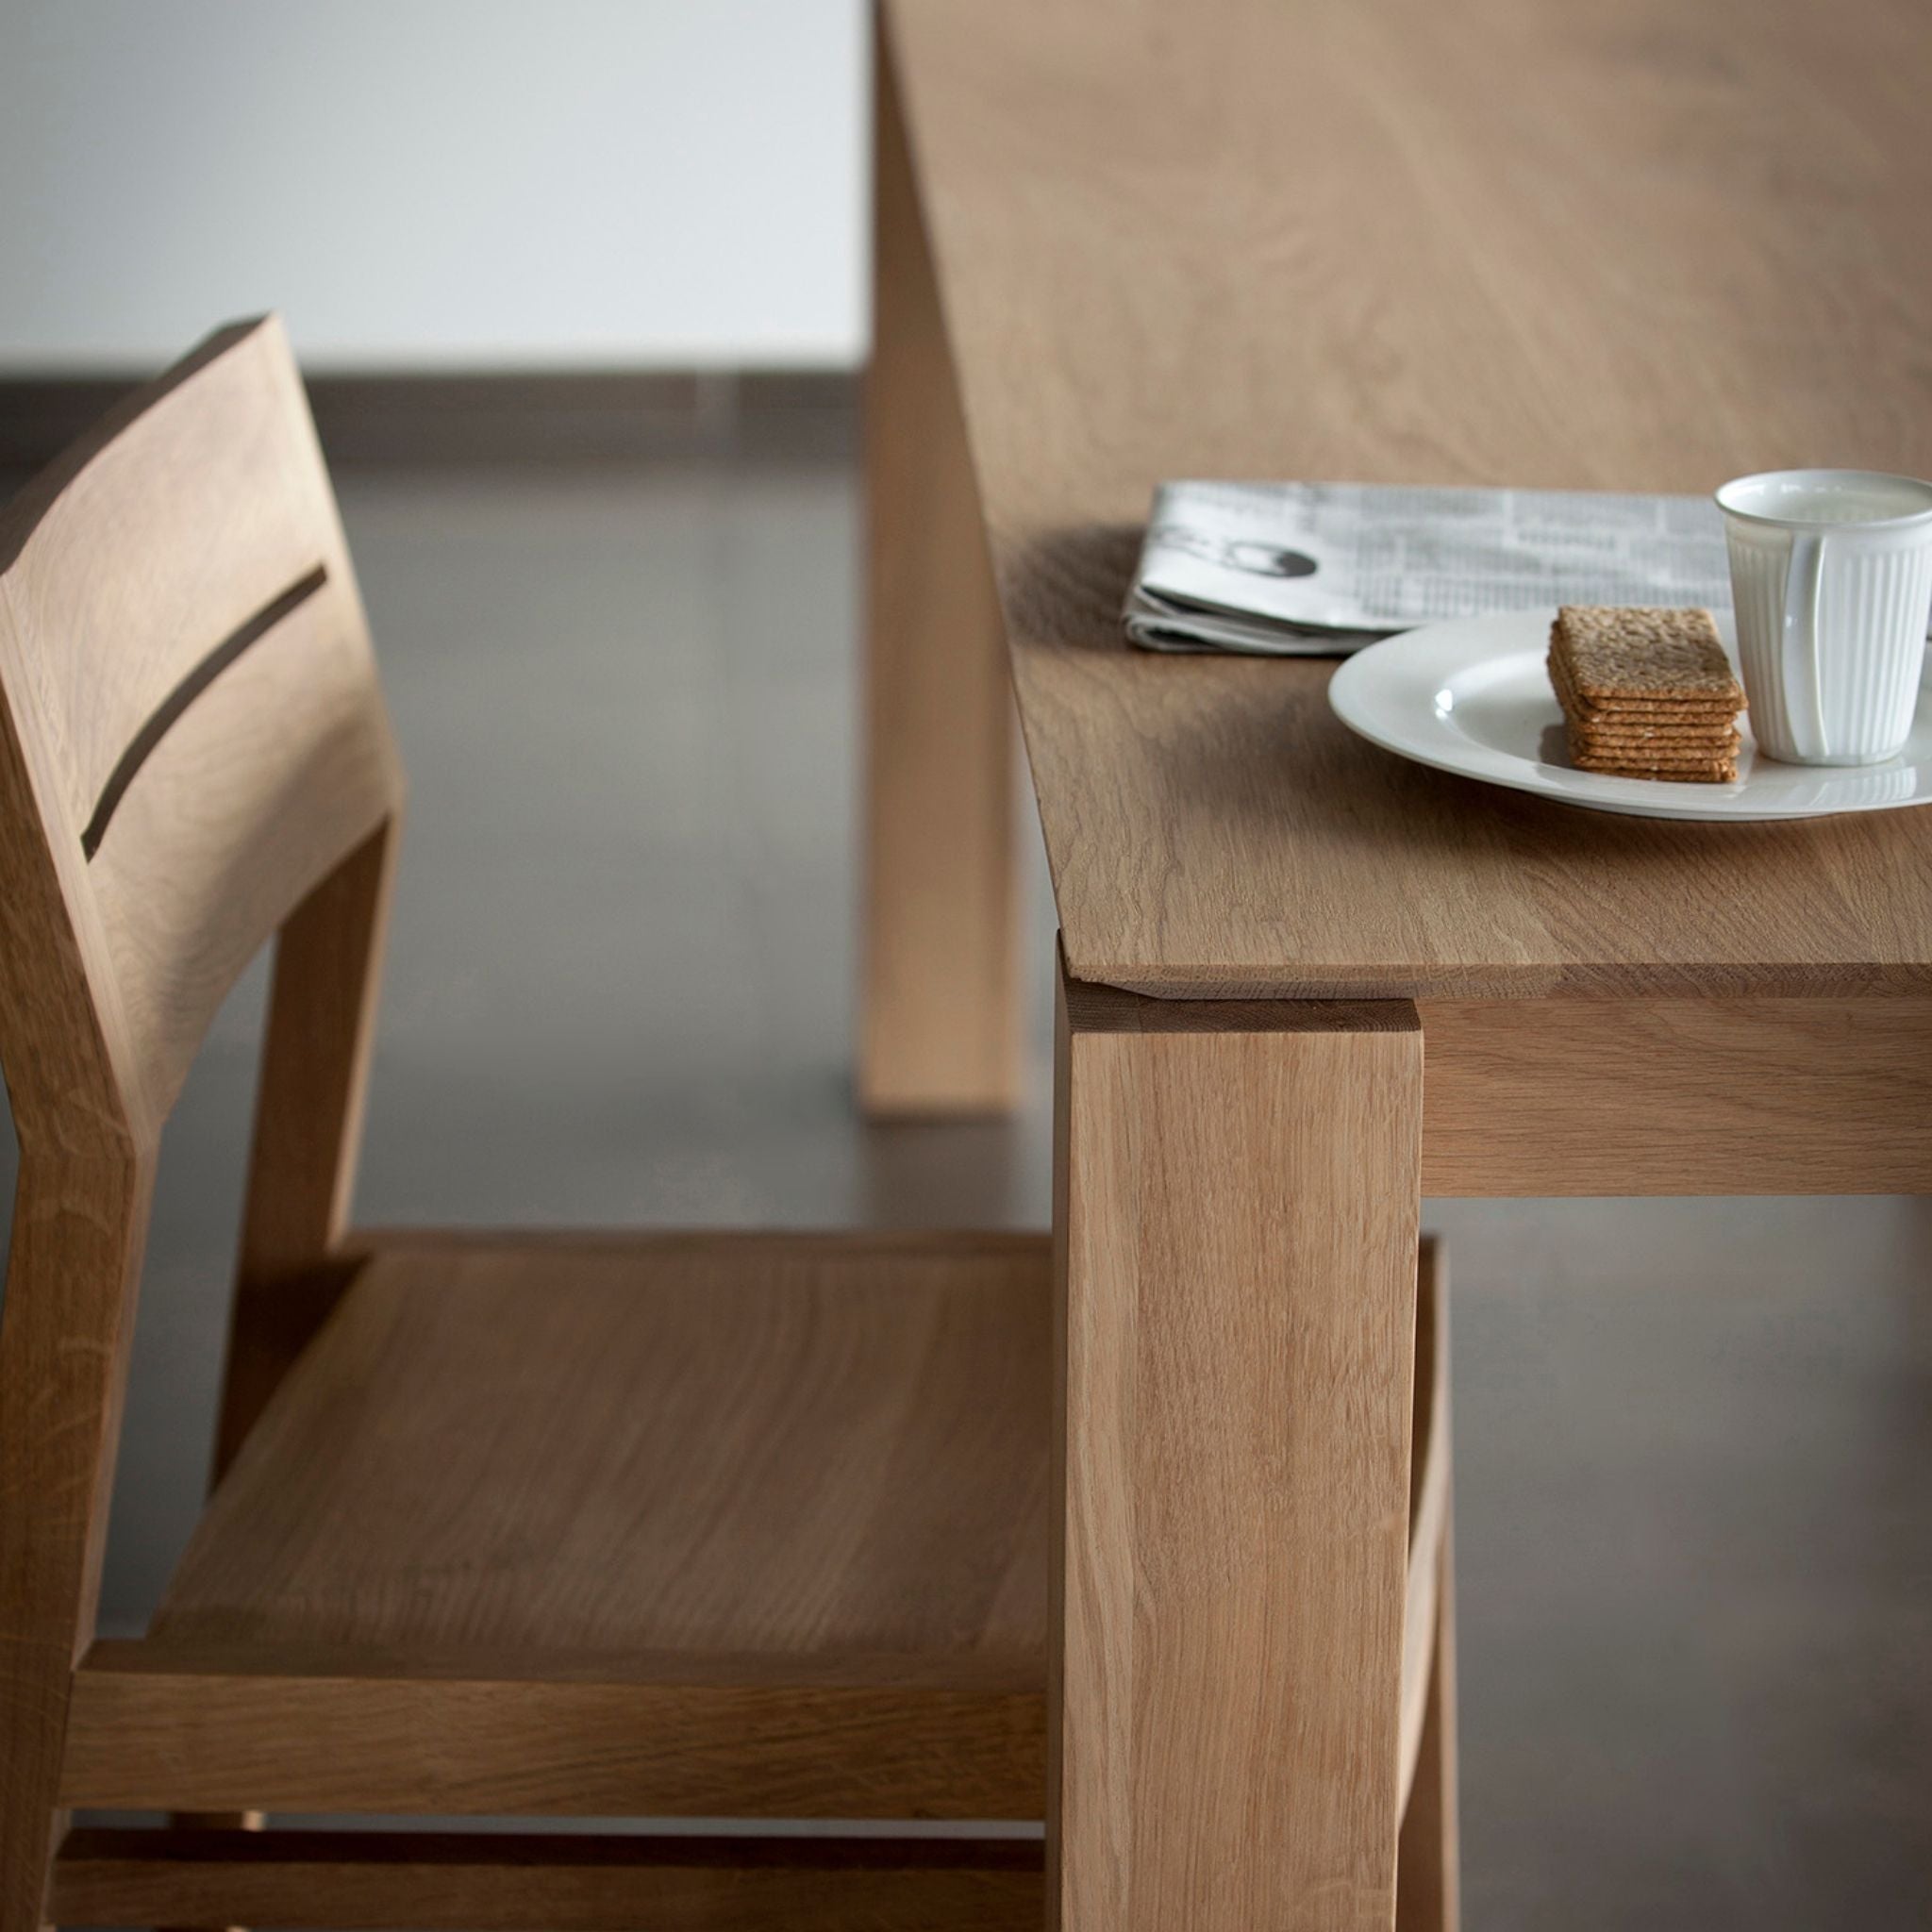 Slice Dining Table - Valley Variety